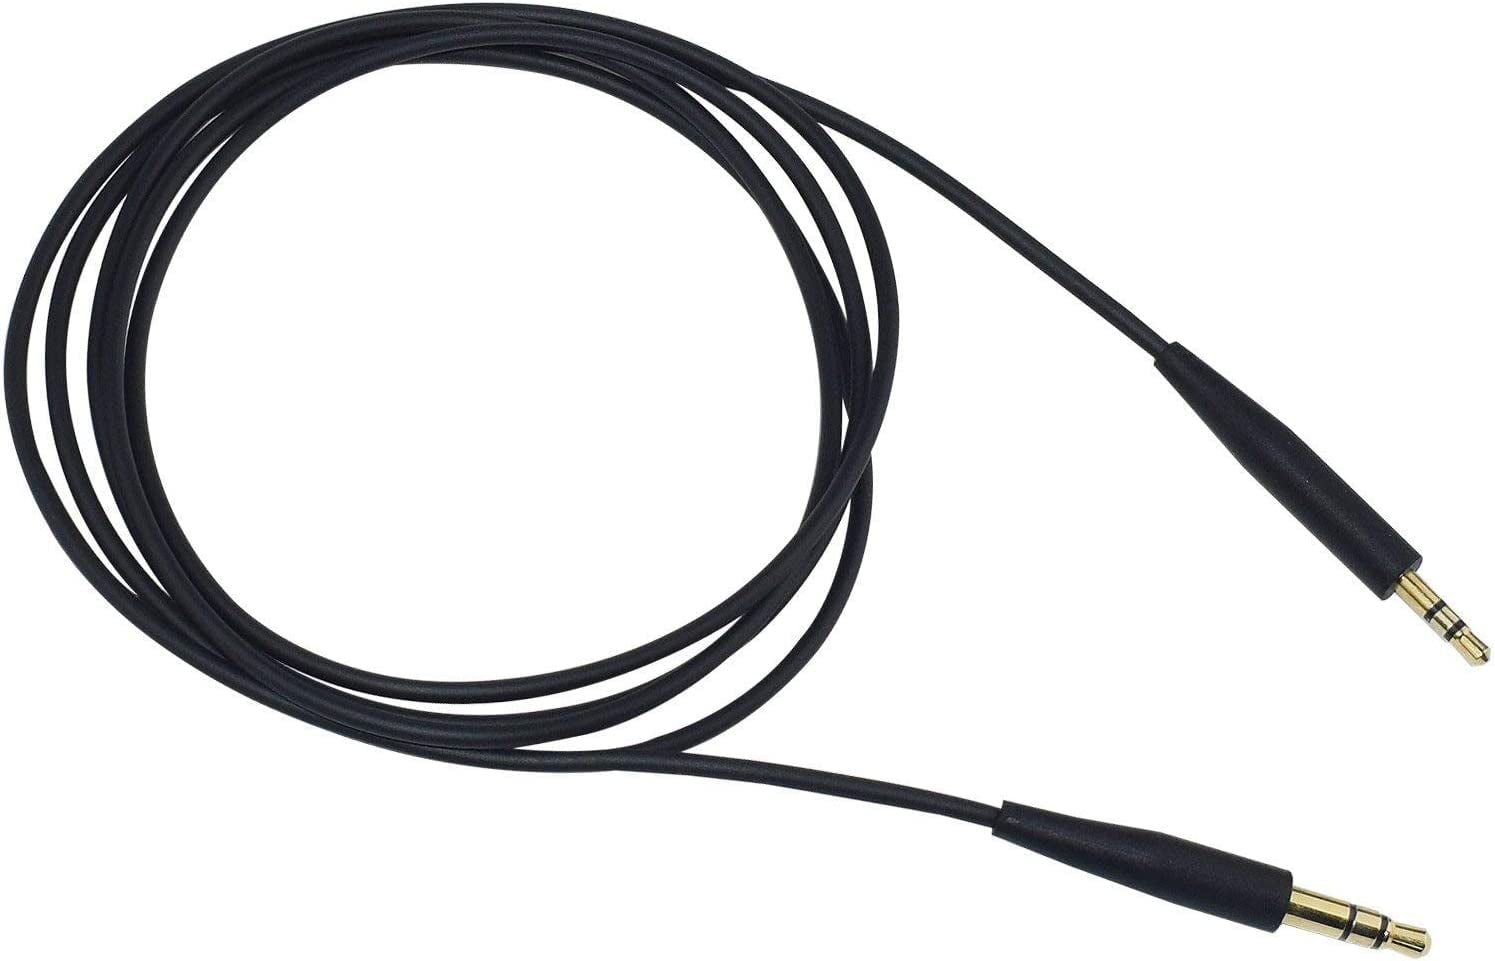 Replacement Extension Audio Cable Cord for Bose OE2 OE 2 On-Ear 2 Headphones Standard 